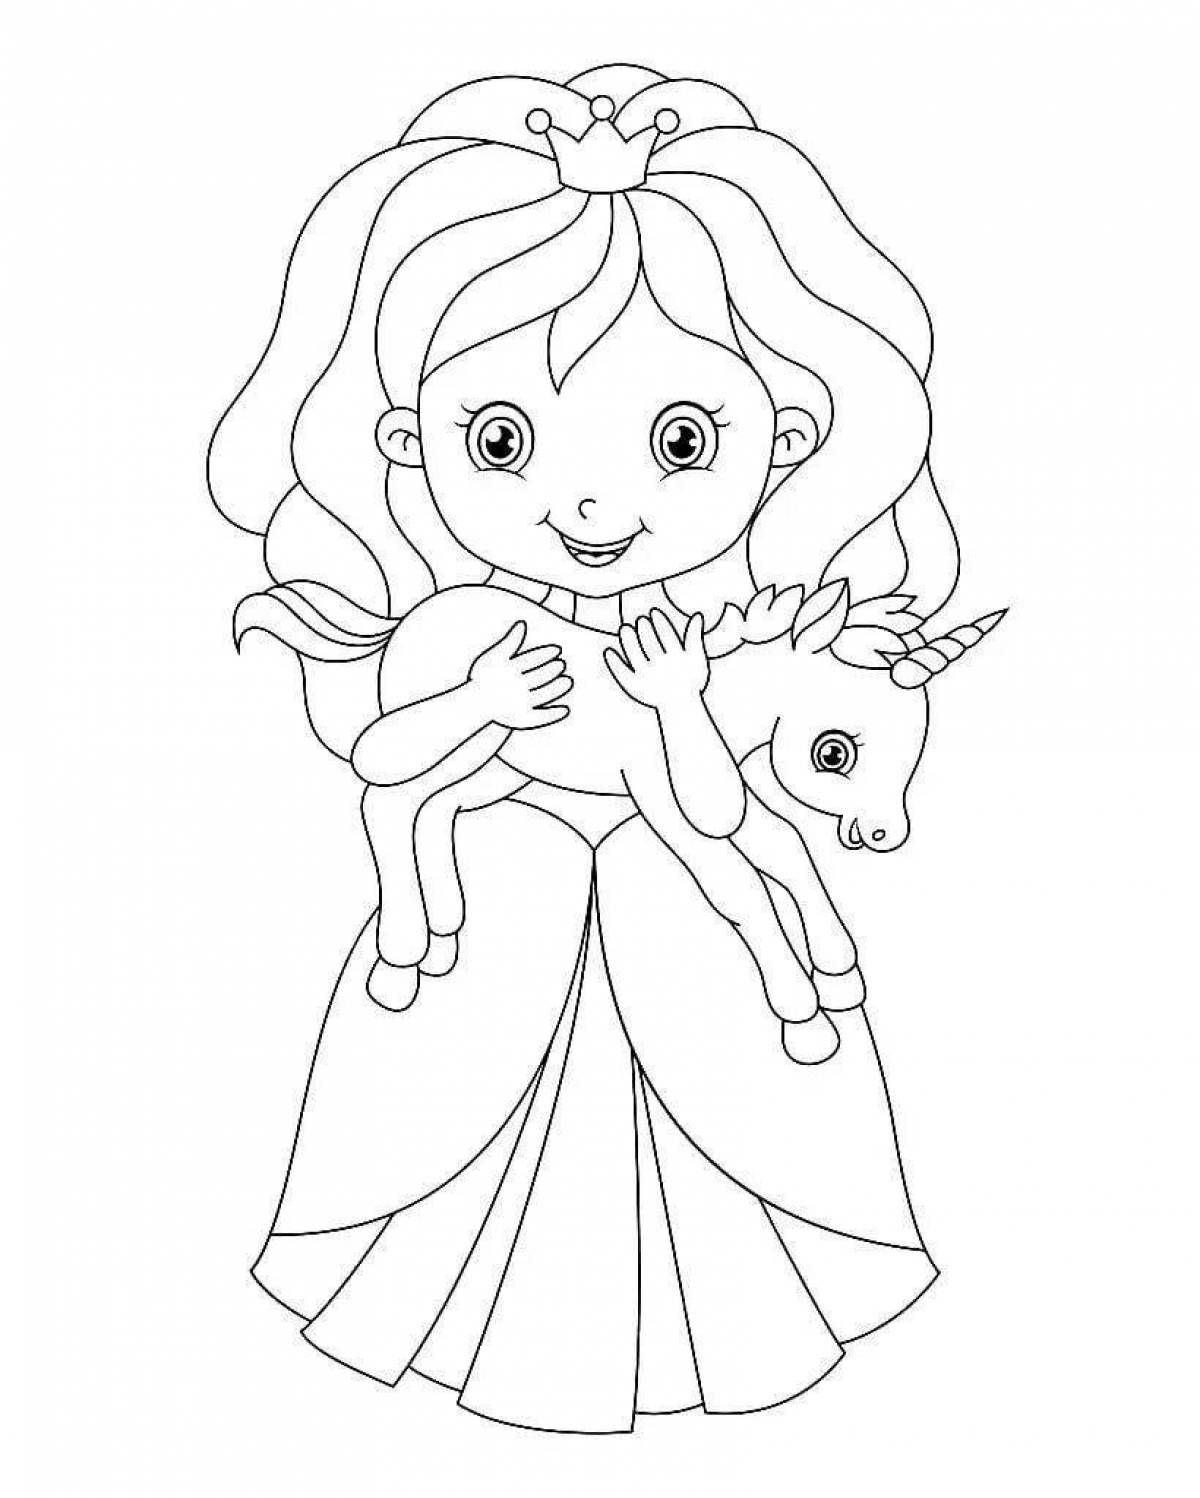 Sparkling coloring page 6 for girls